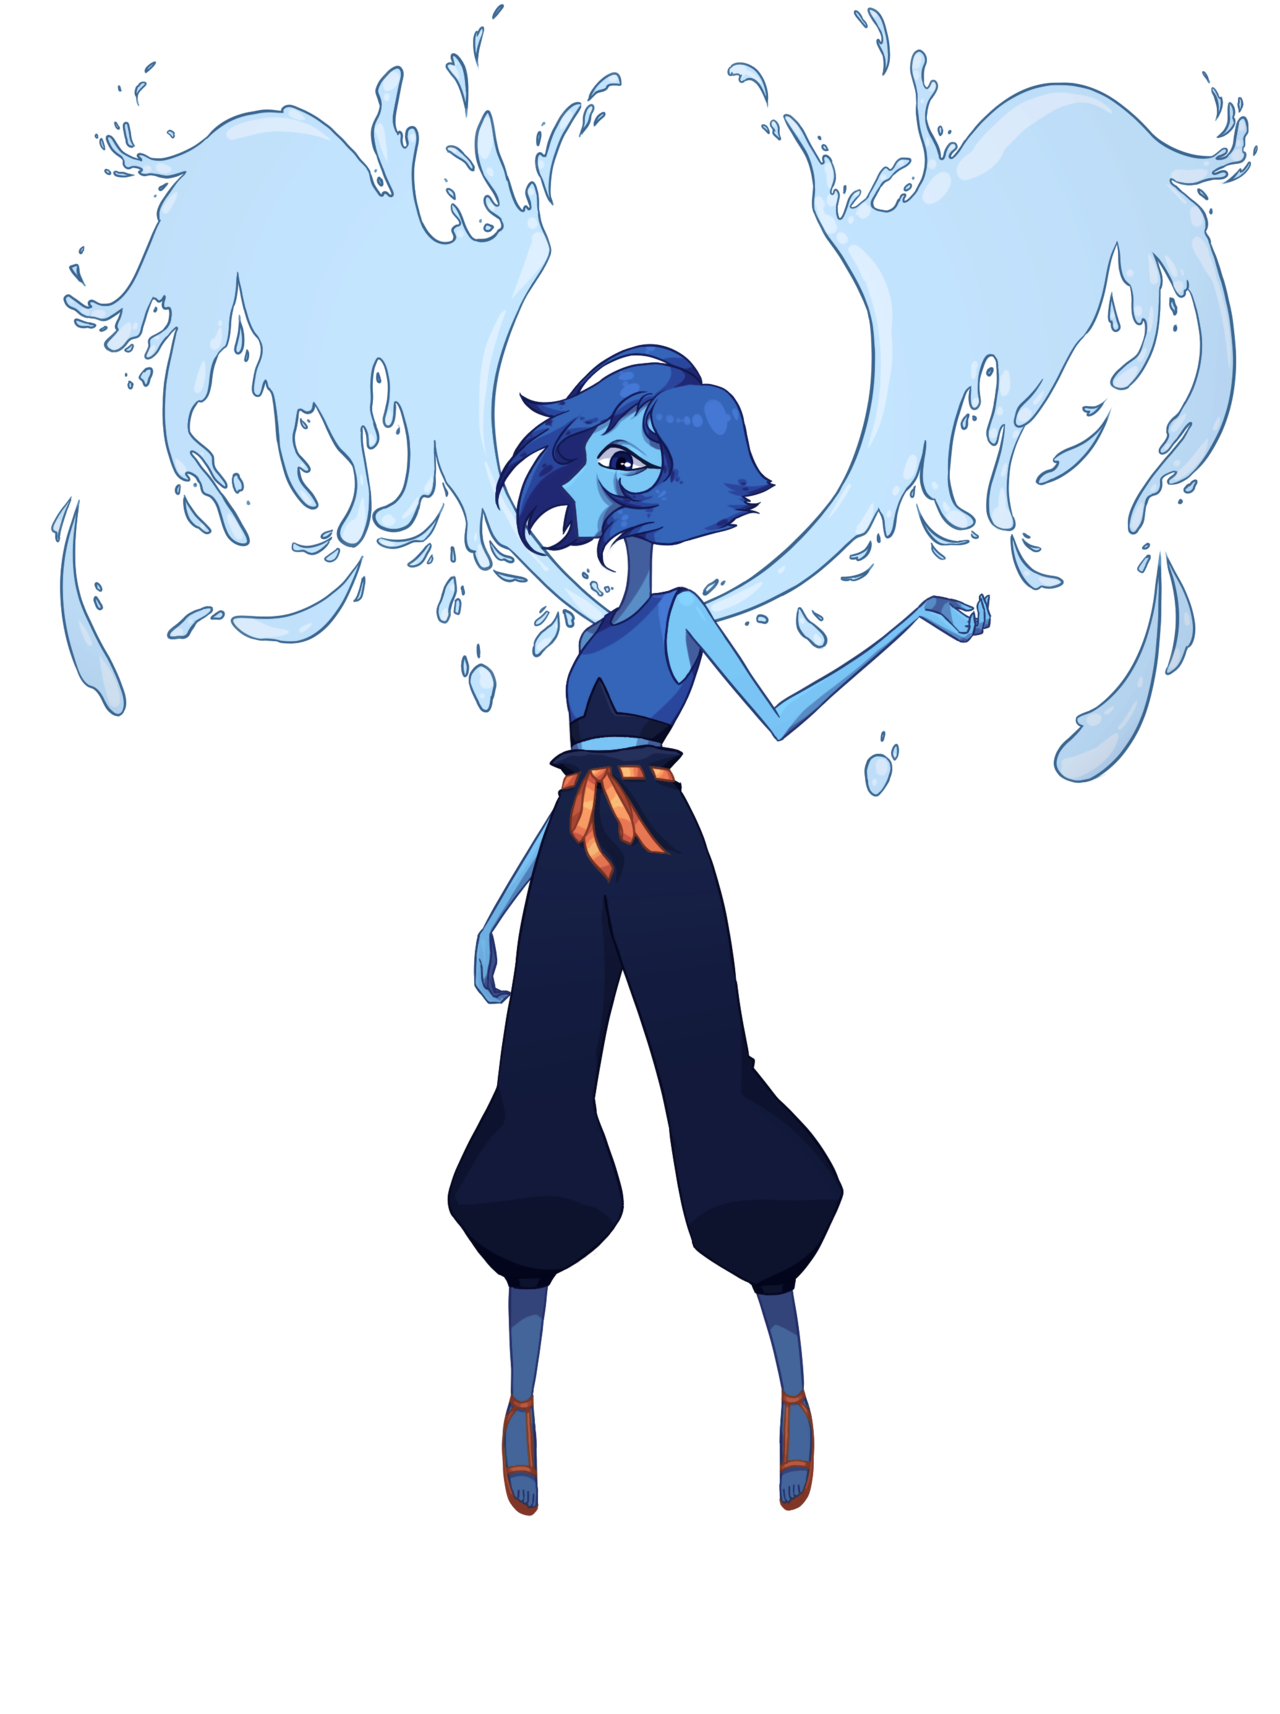 My lapis lazuli doodle
Really like how the water wings turned out